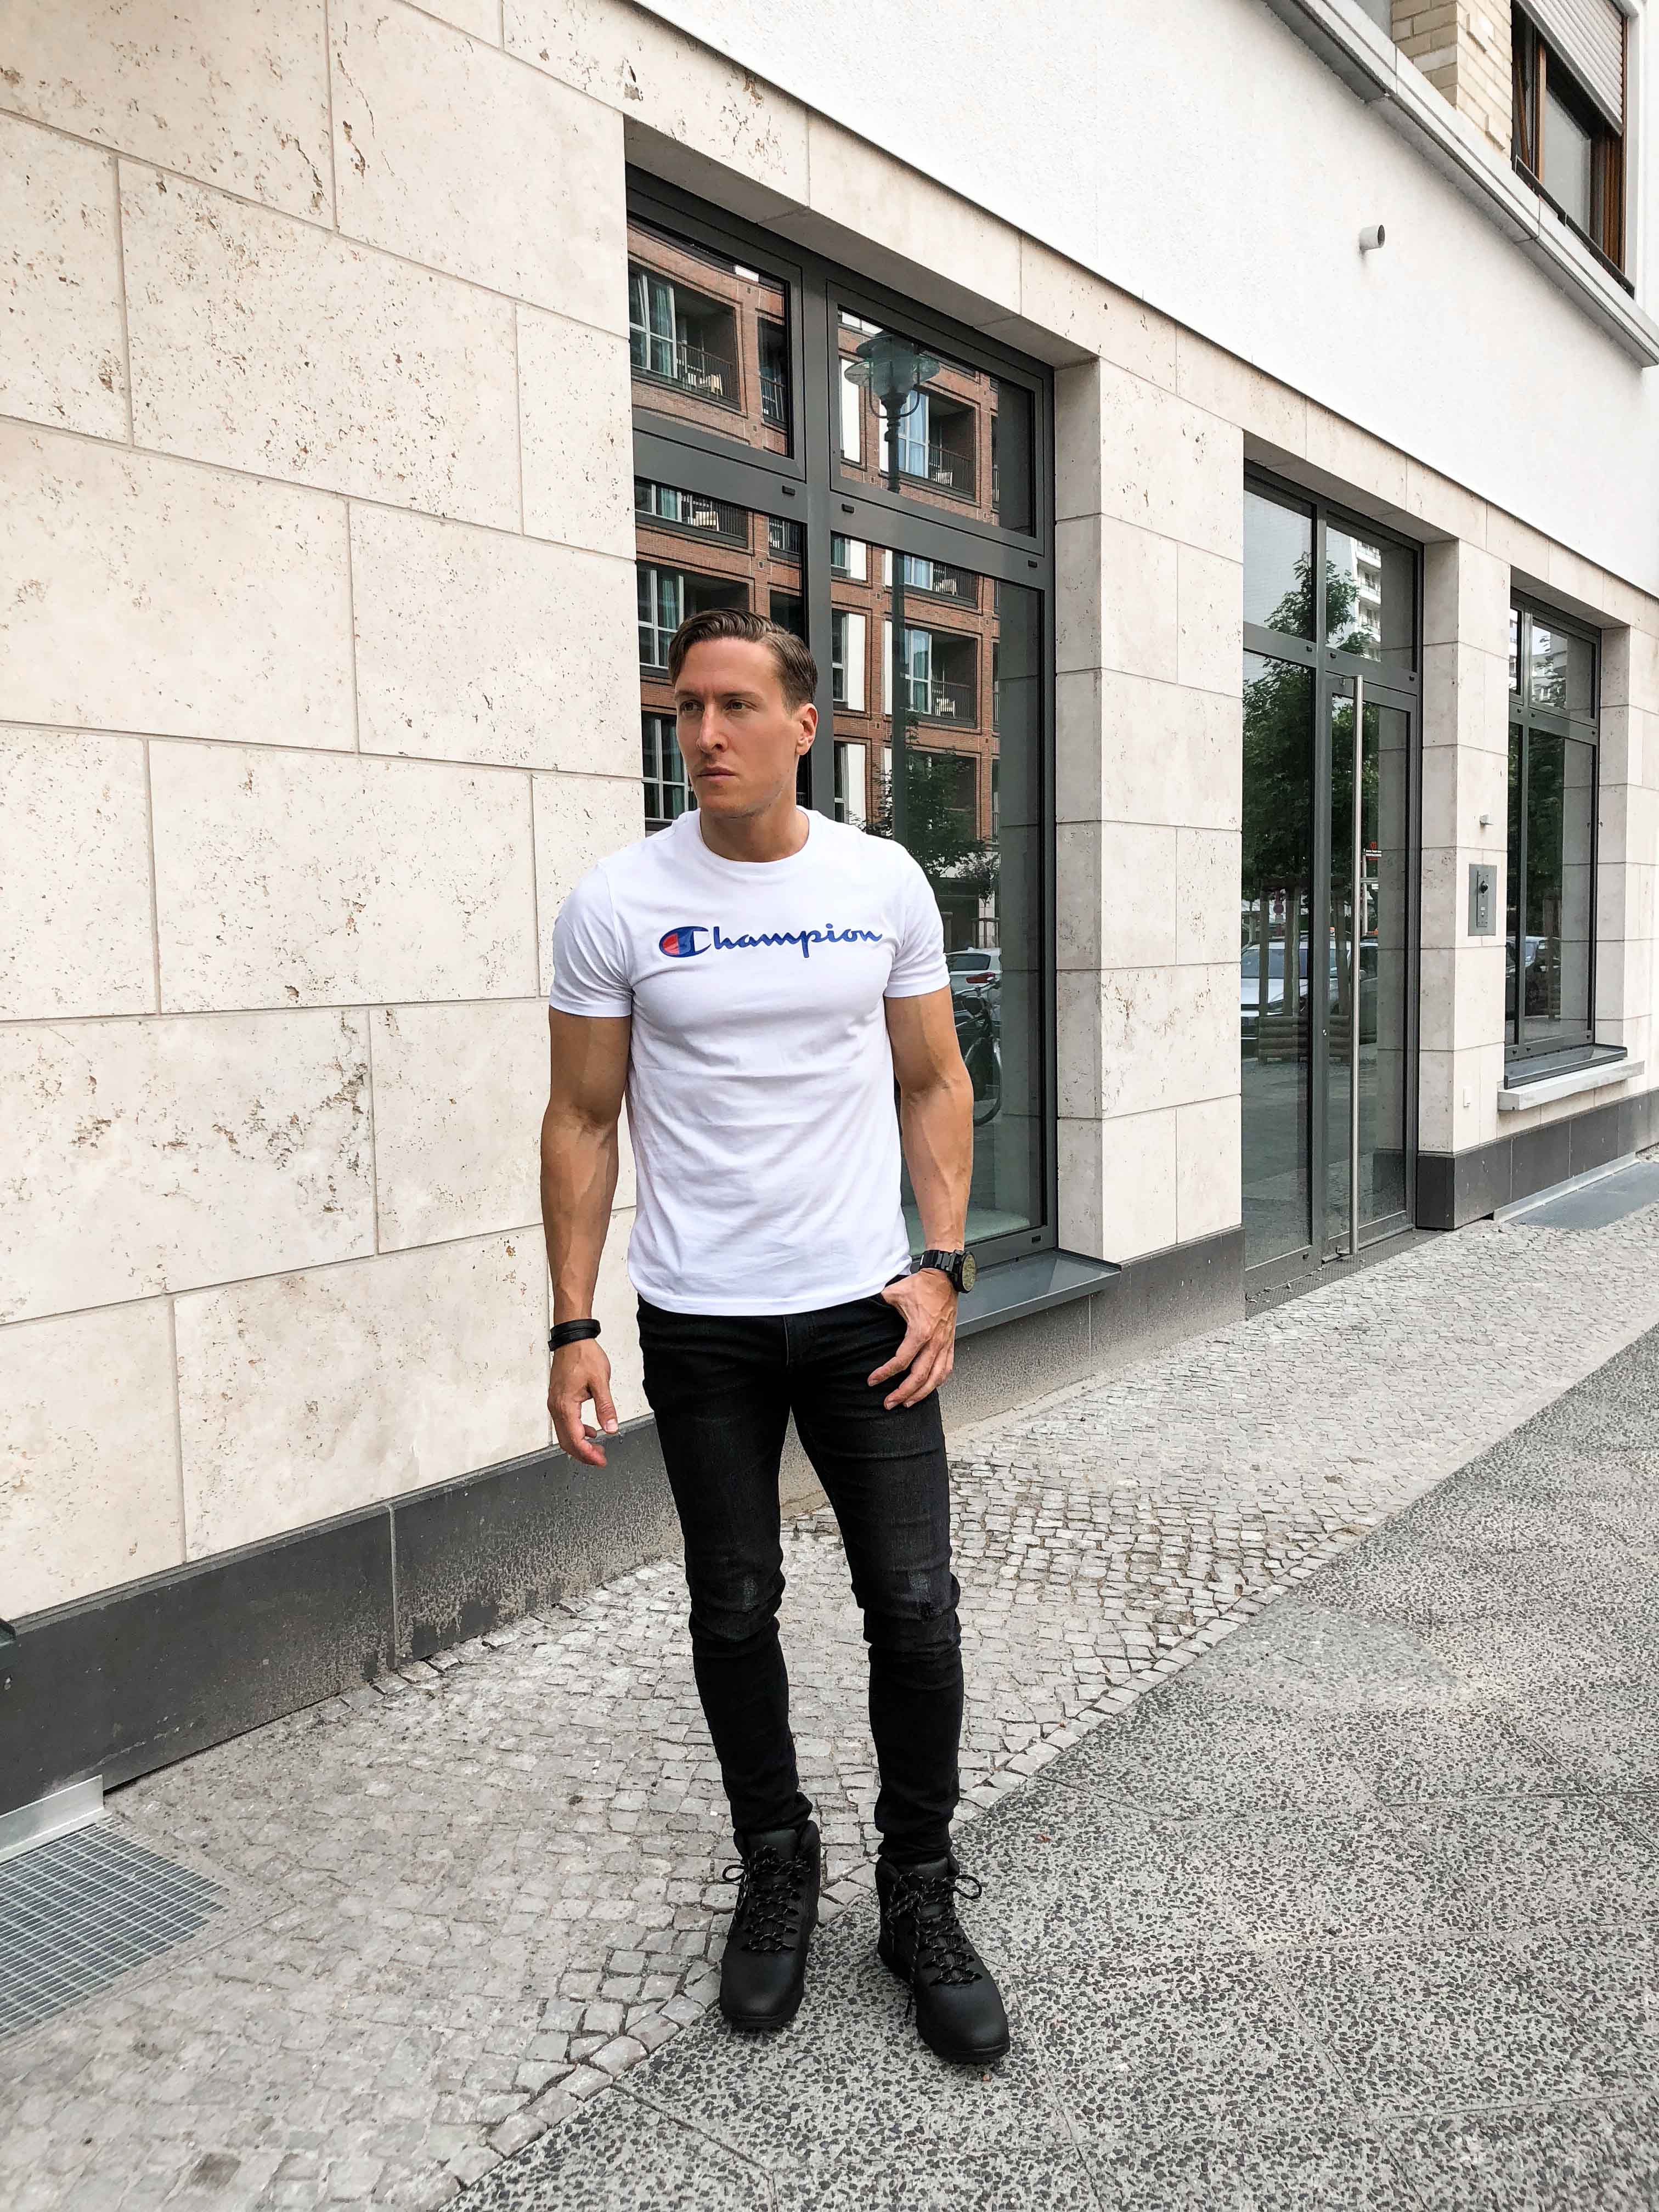 weisses-champion-shirt-sportlicher-look-sommer-berlin-blogger-retro-modeblog-timberland-helcor-boots-outfit